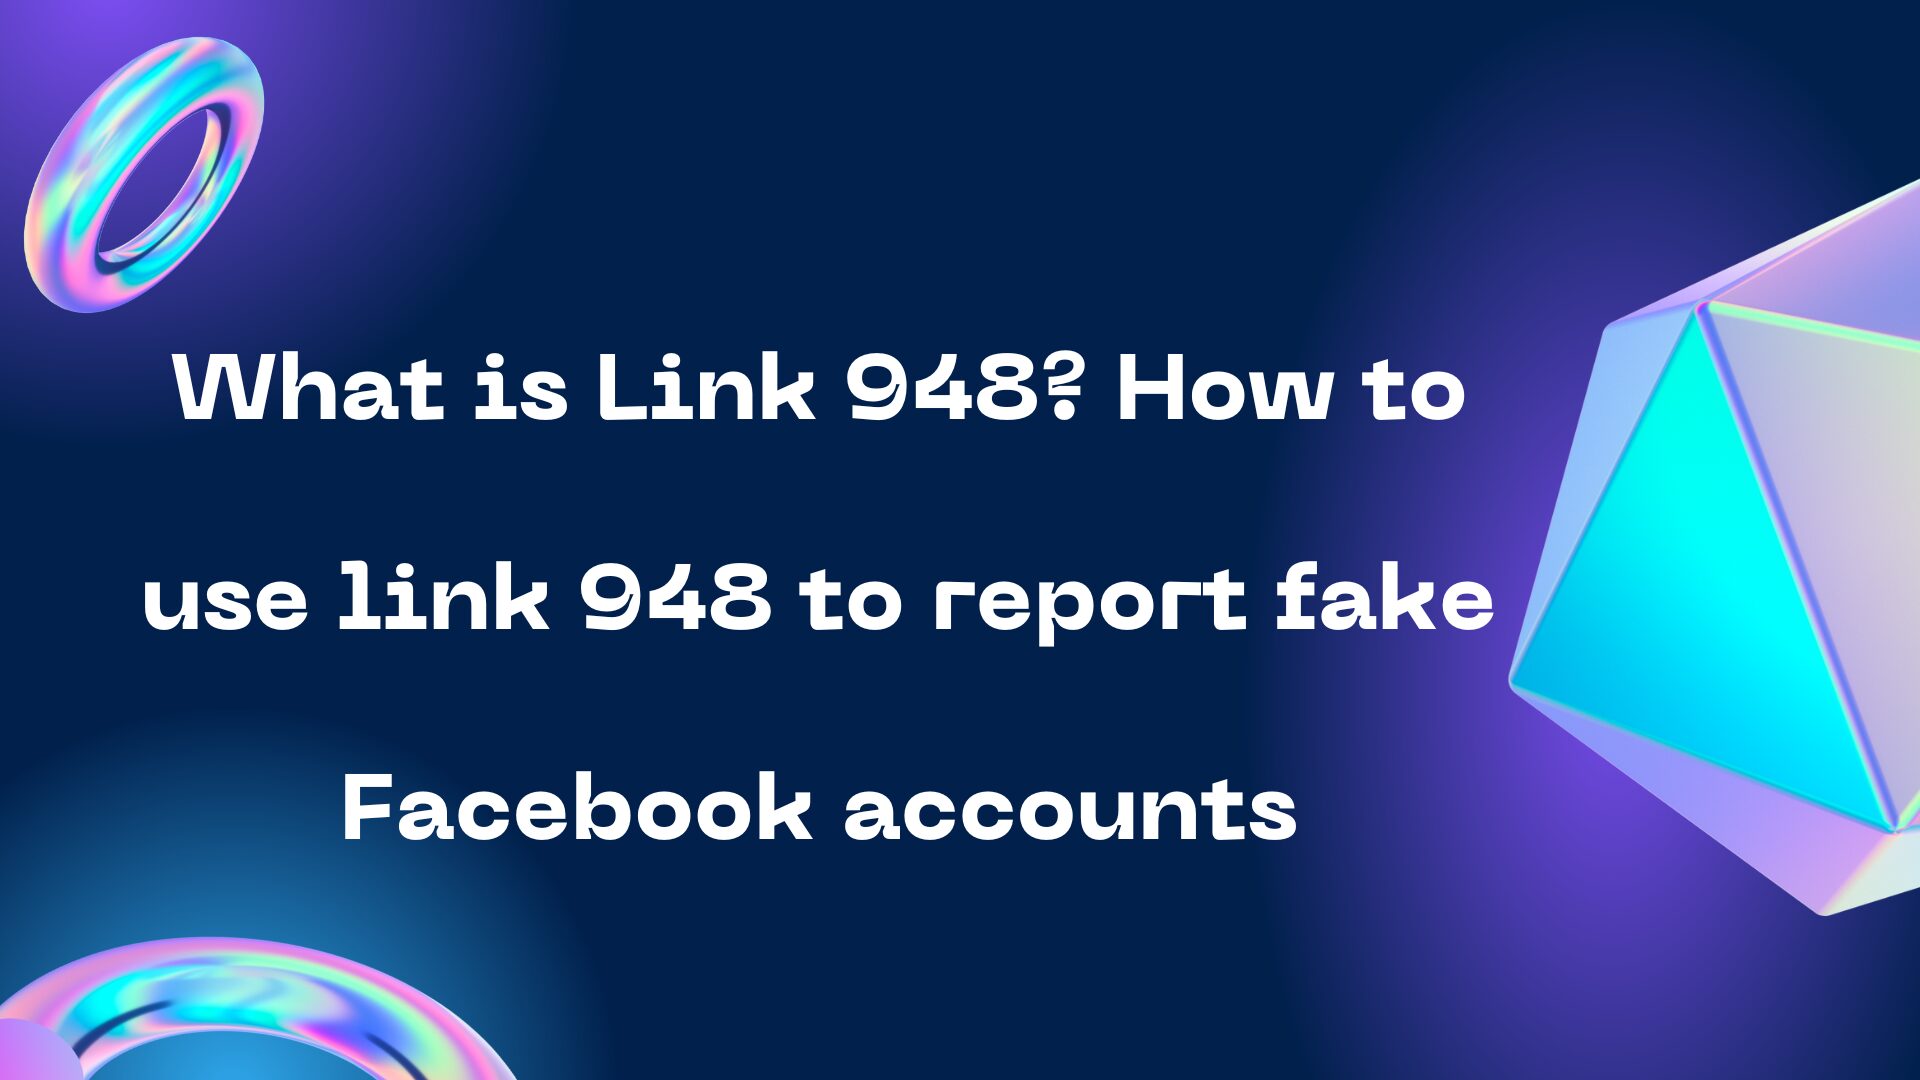 What is Link 948? How to use link 948 to report fake Facebook accounts